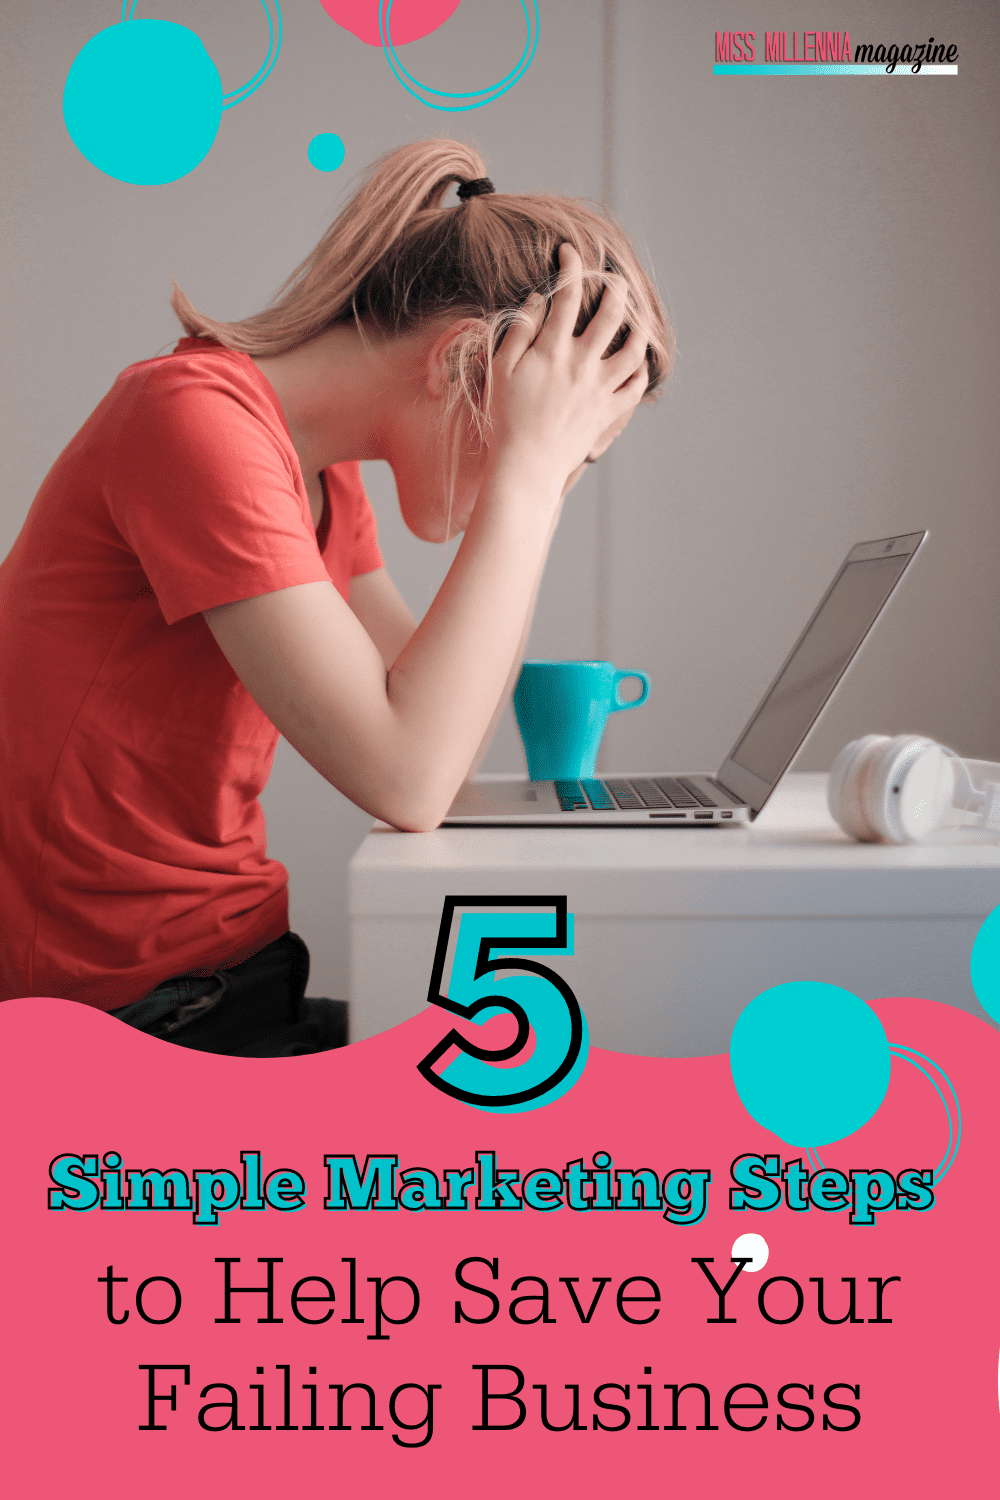 5 Simple Marketing Steps to Help Save Your Failing Business